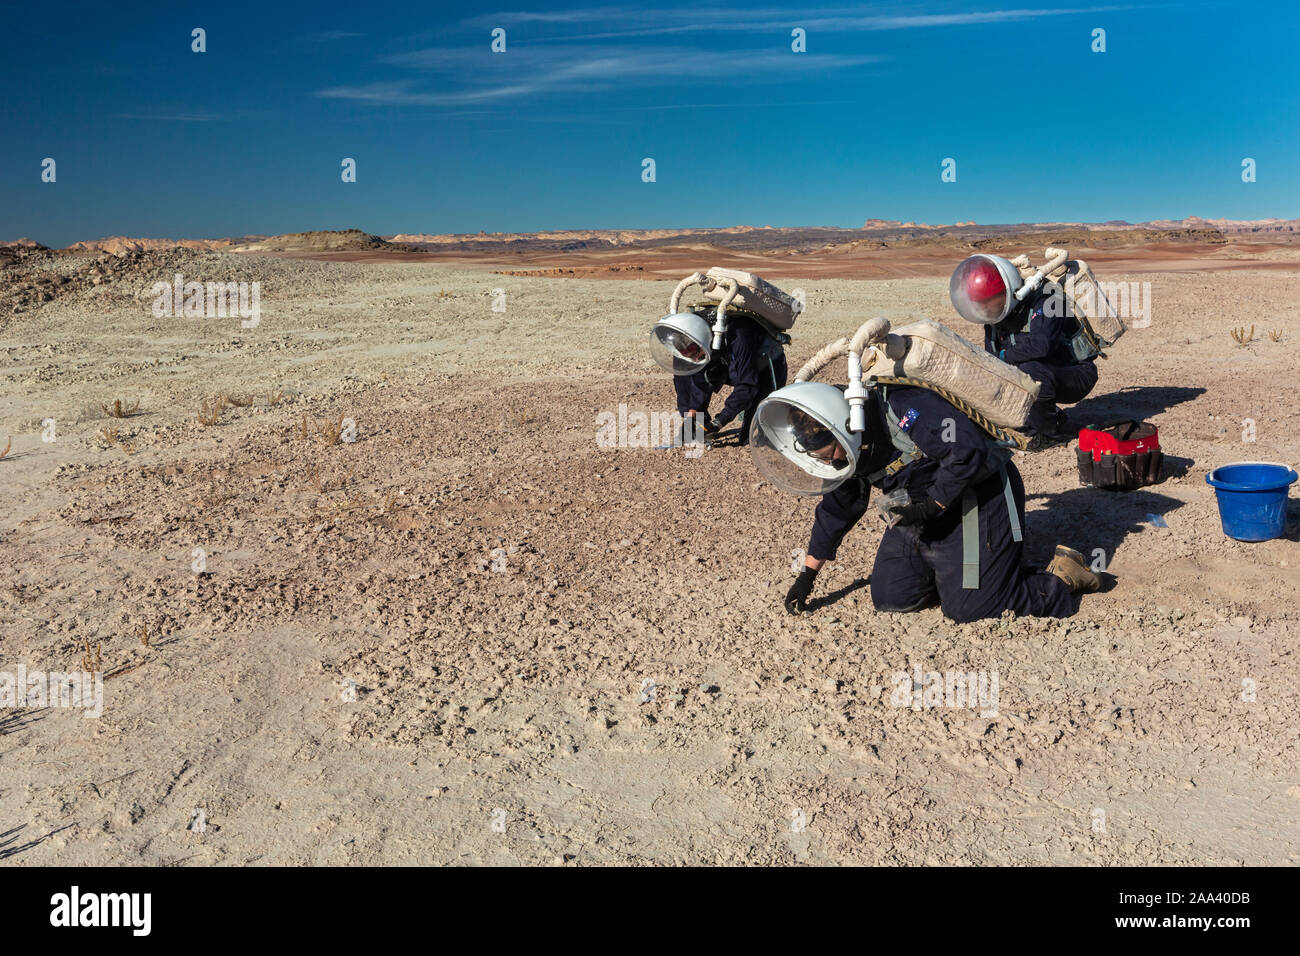 Hanksville, Utah - Researchers simulate living on Mars at the Mars Desert Research Station. 'Expedition Boomerang' brought Australian researchers to t Stock Photo